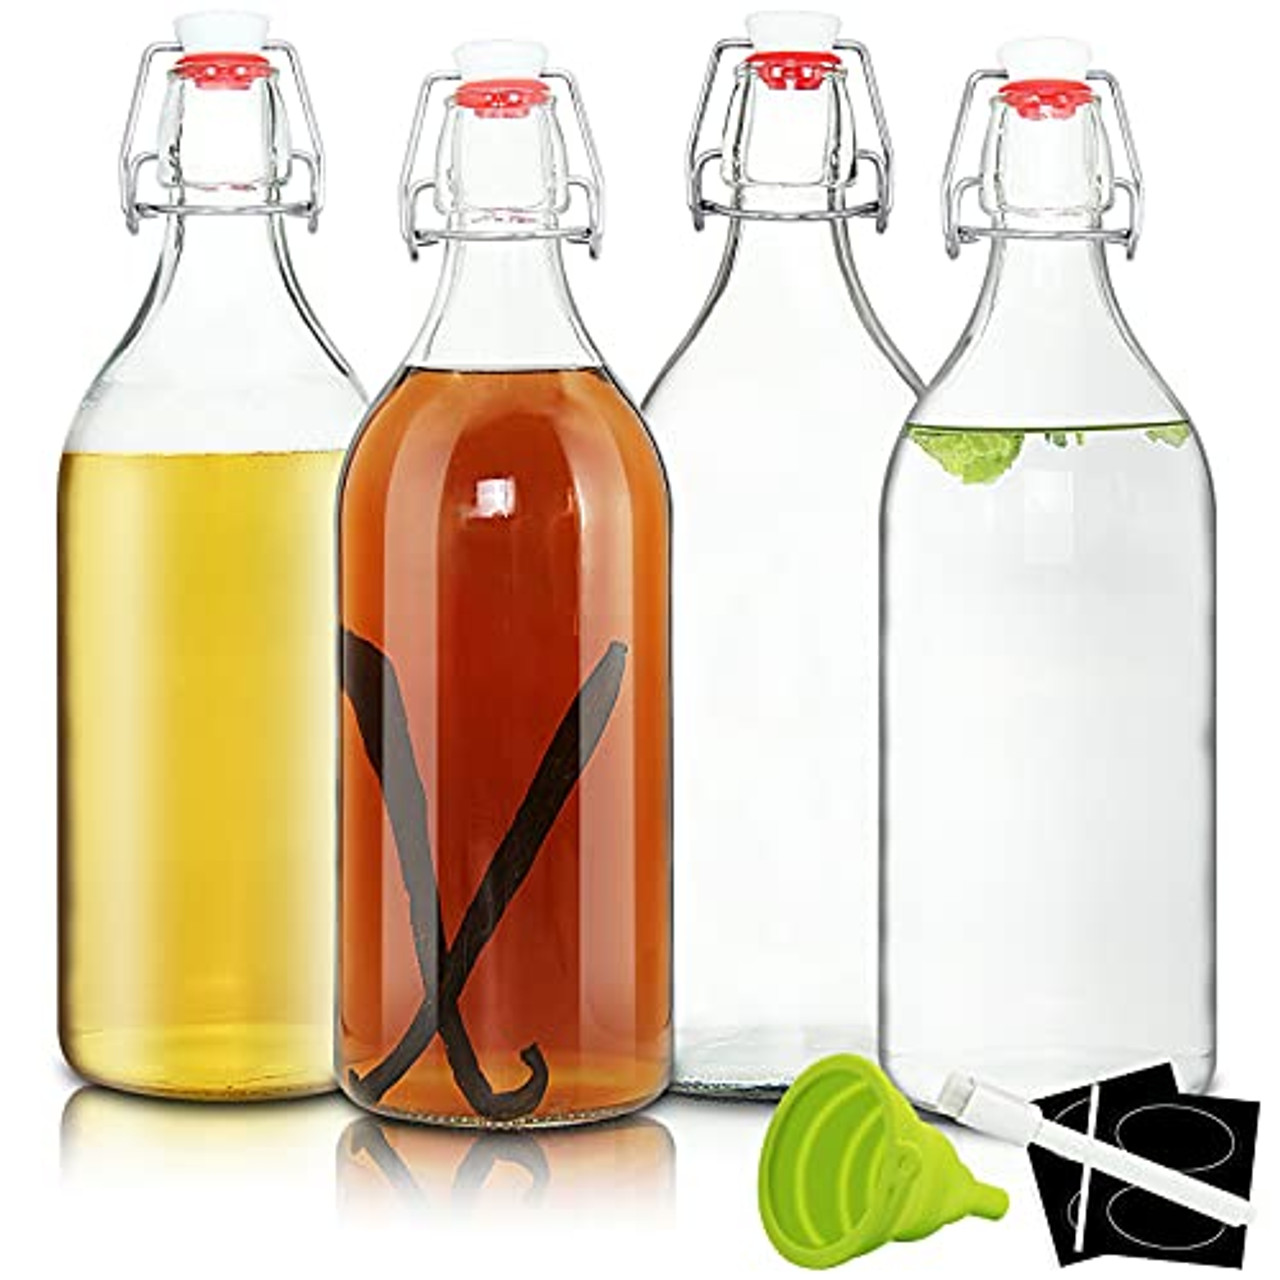 32oz Swing Top Bottles -Glass Beer Bottle with Airtight Rubber Seal Flip  Caps for Home Brewing